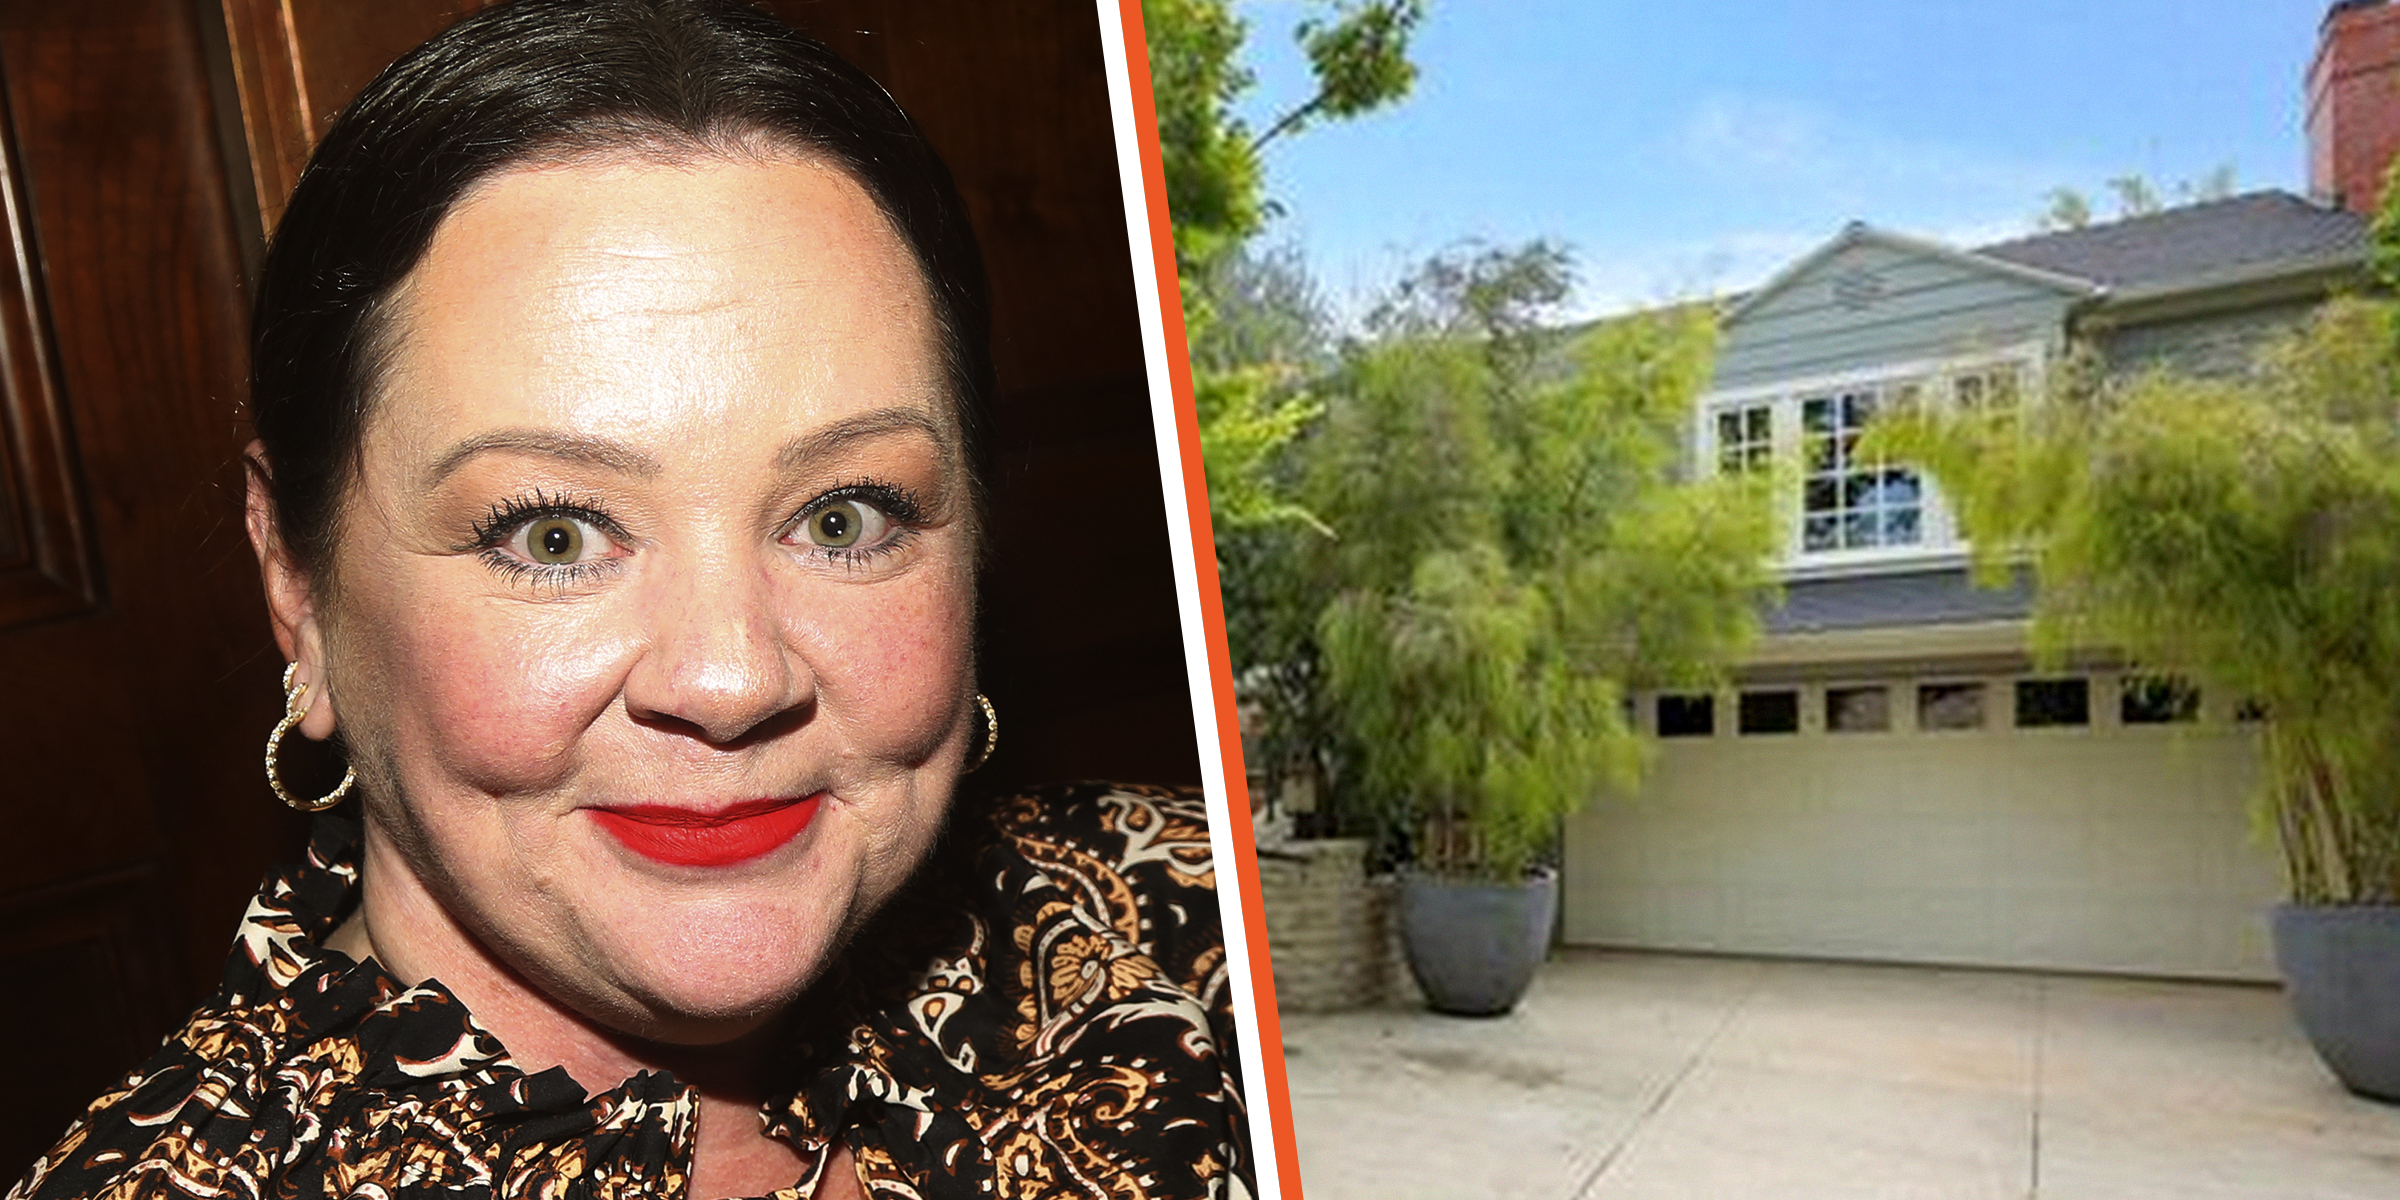 Melissa McCarthy, 2023 | Melissa McCarthy and Ben Falcone's Toluca Lake, California Home, 2018 | Source: Facebook.com/Los Angeles Daily News | Getty Images